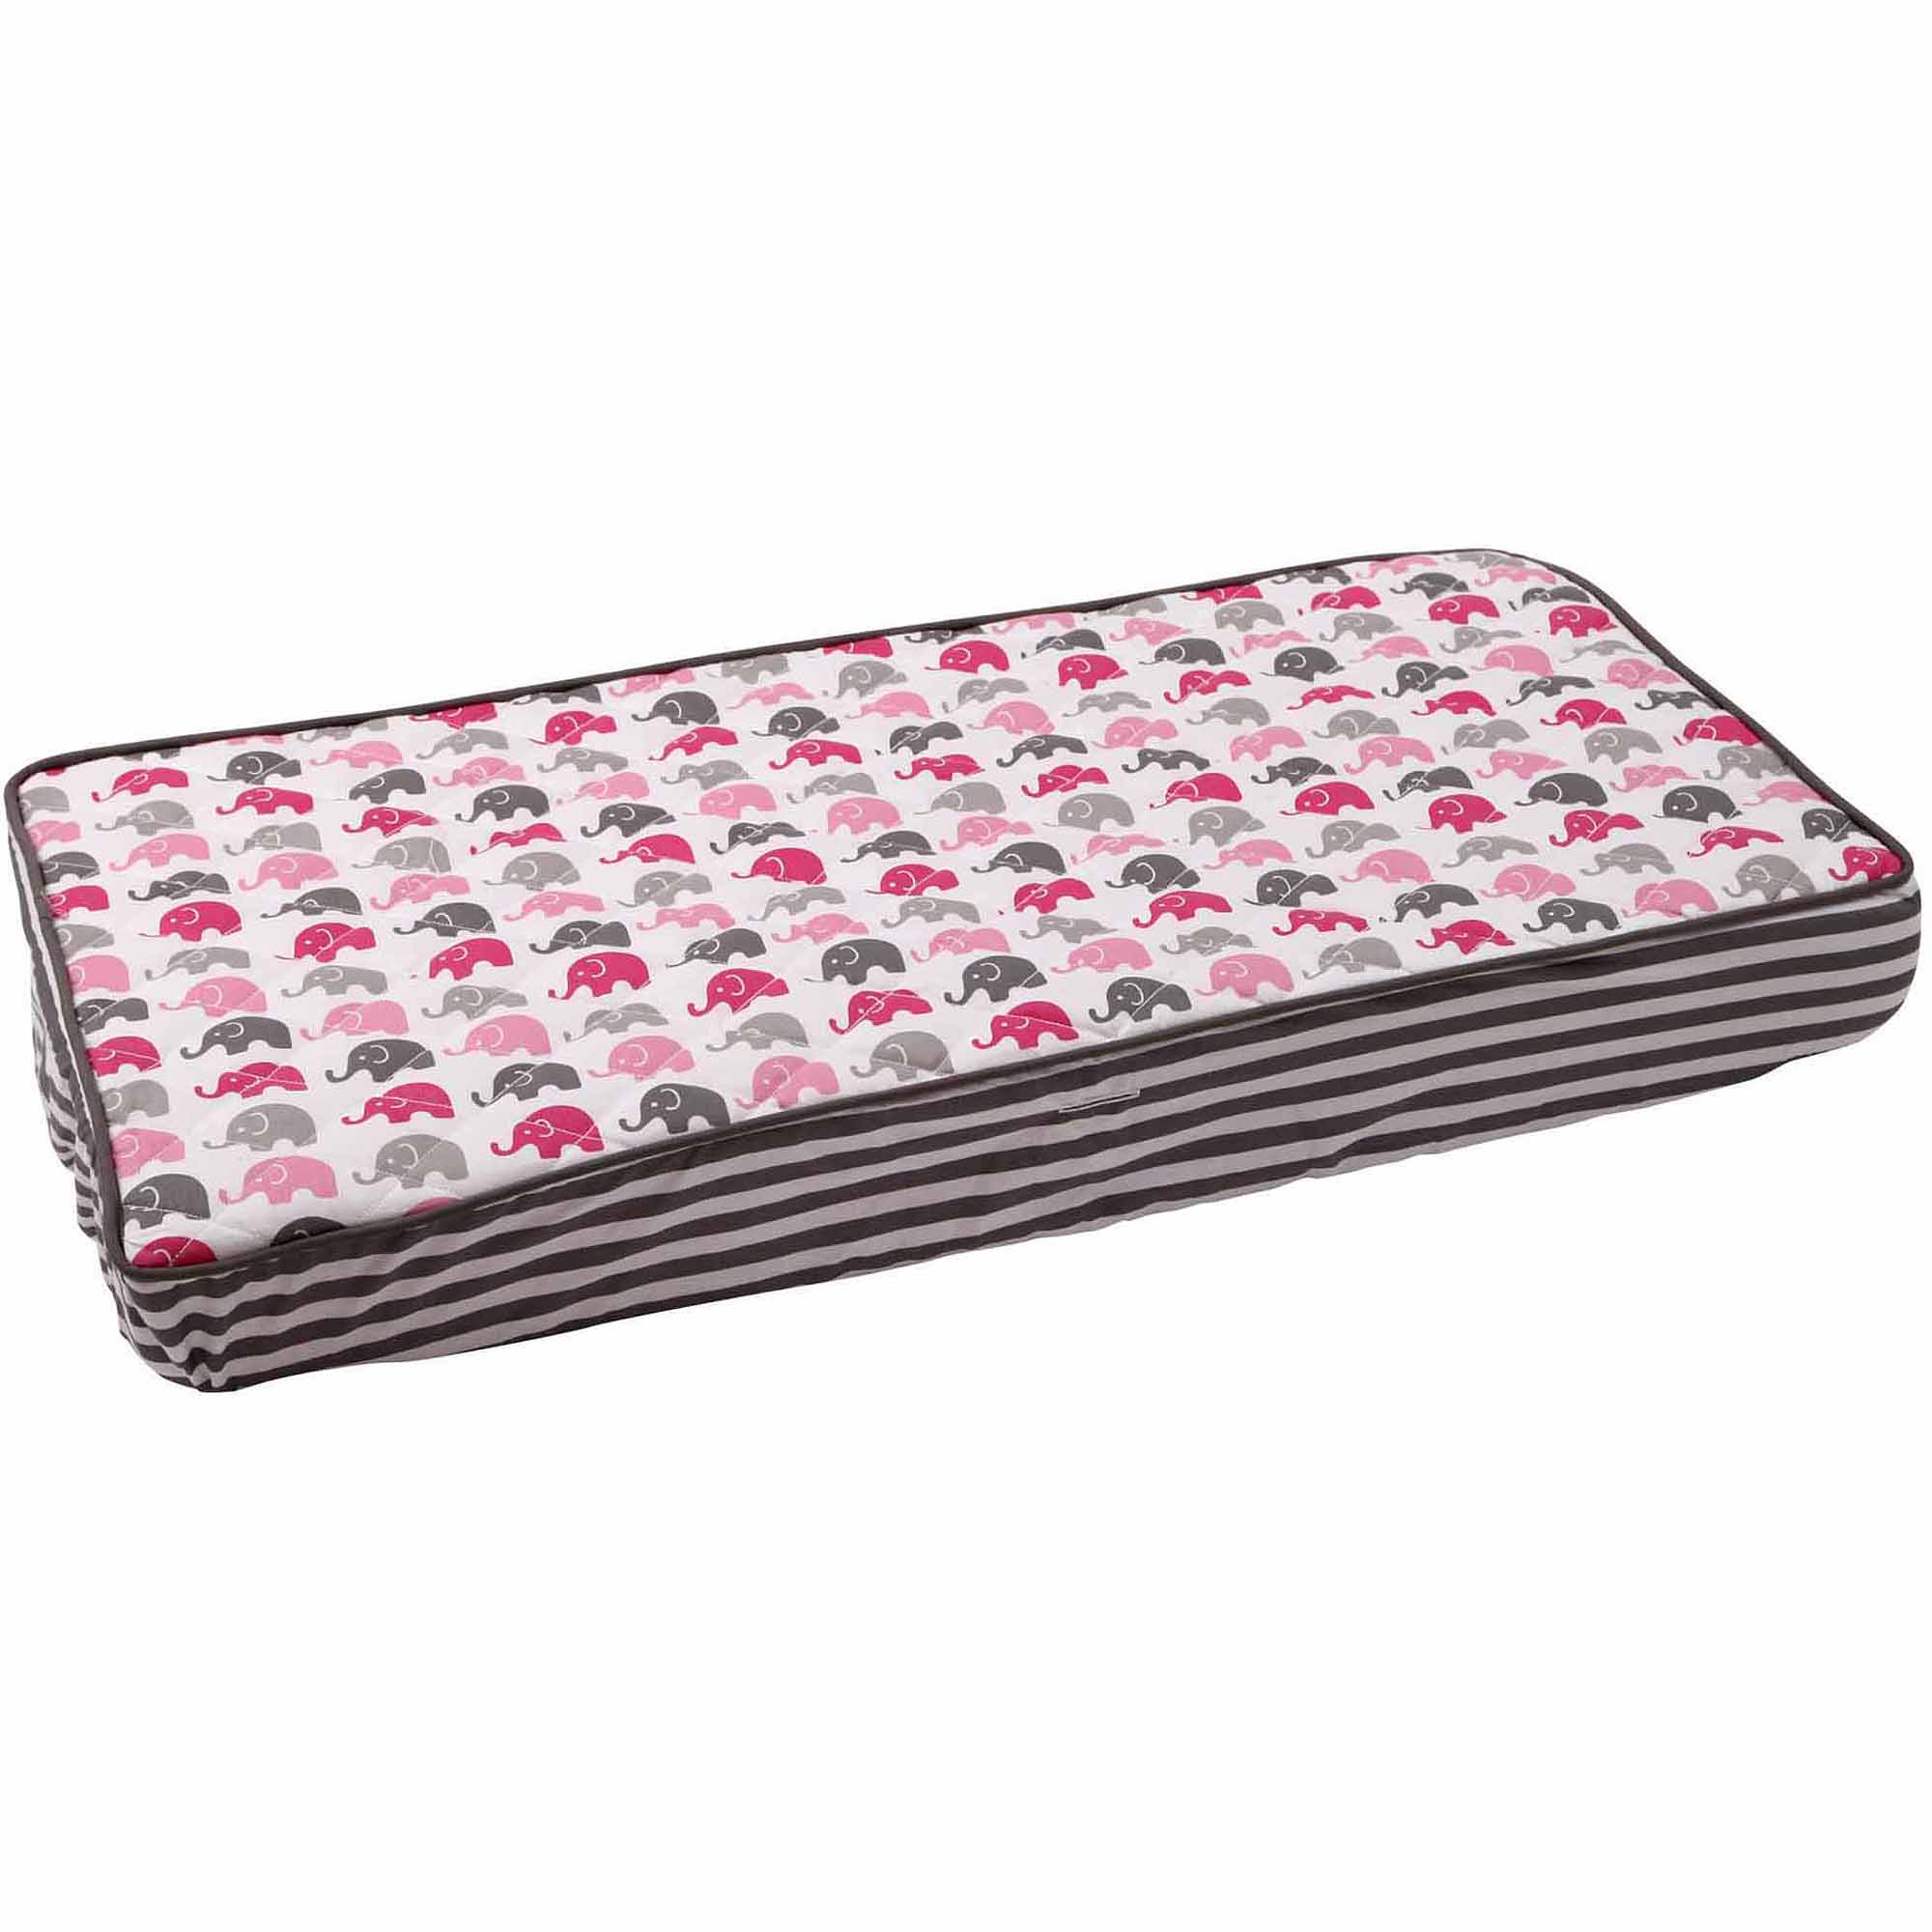 Bacati - Elephants Mini Elephants Quilted Top 100% Cotton Percale with Polyester Batting Diaper Changing Pad Cover, Pink/Gray - image 1 of 2